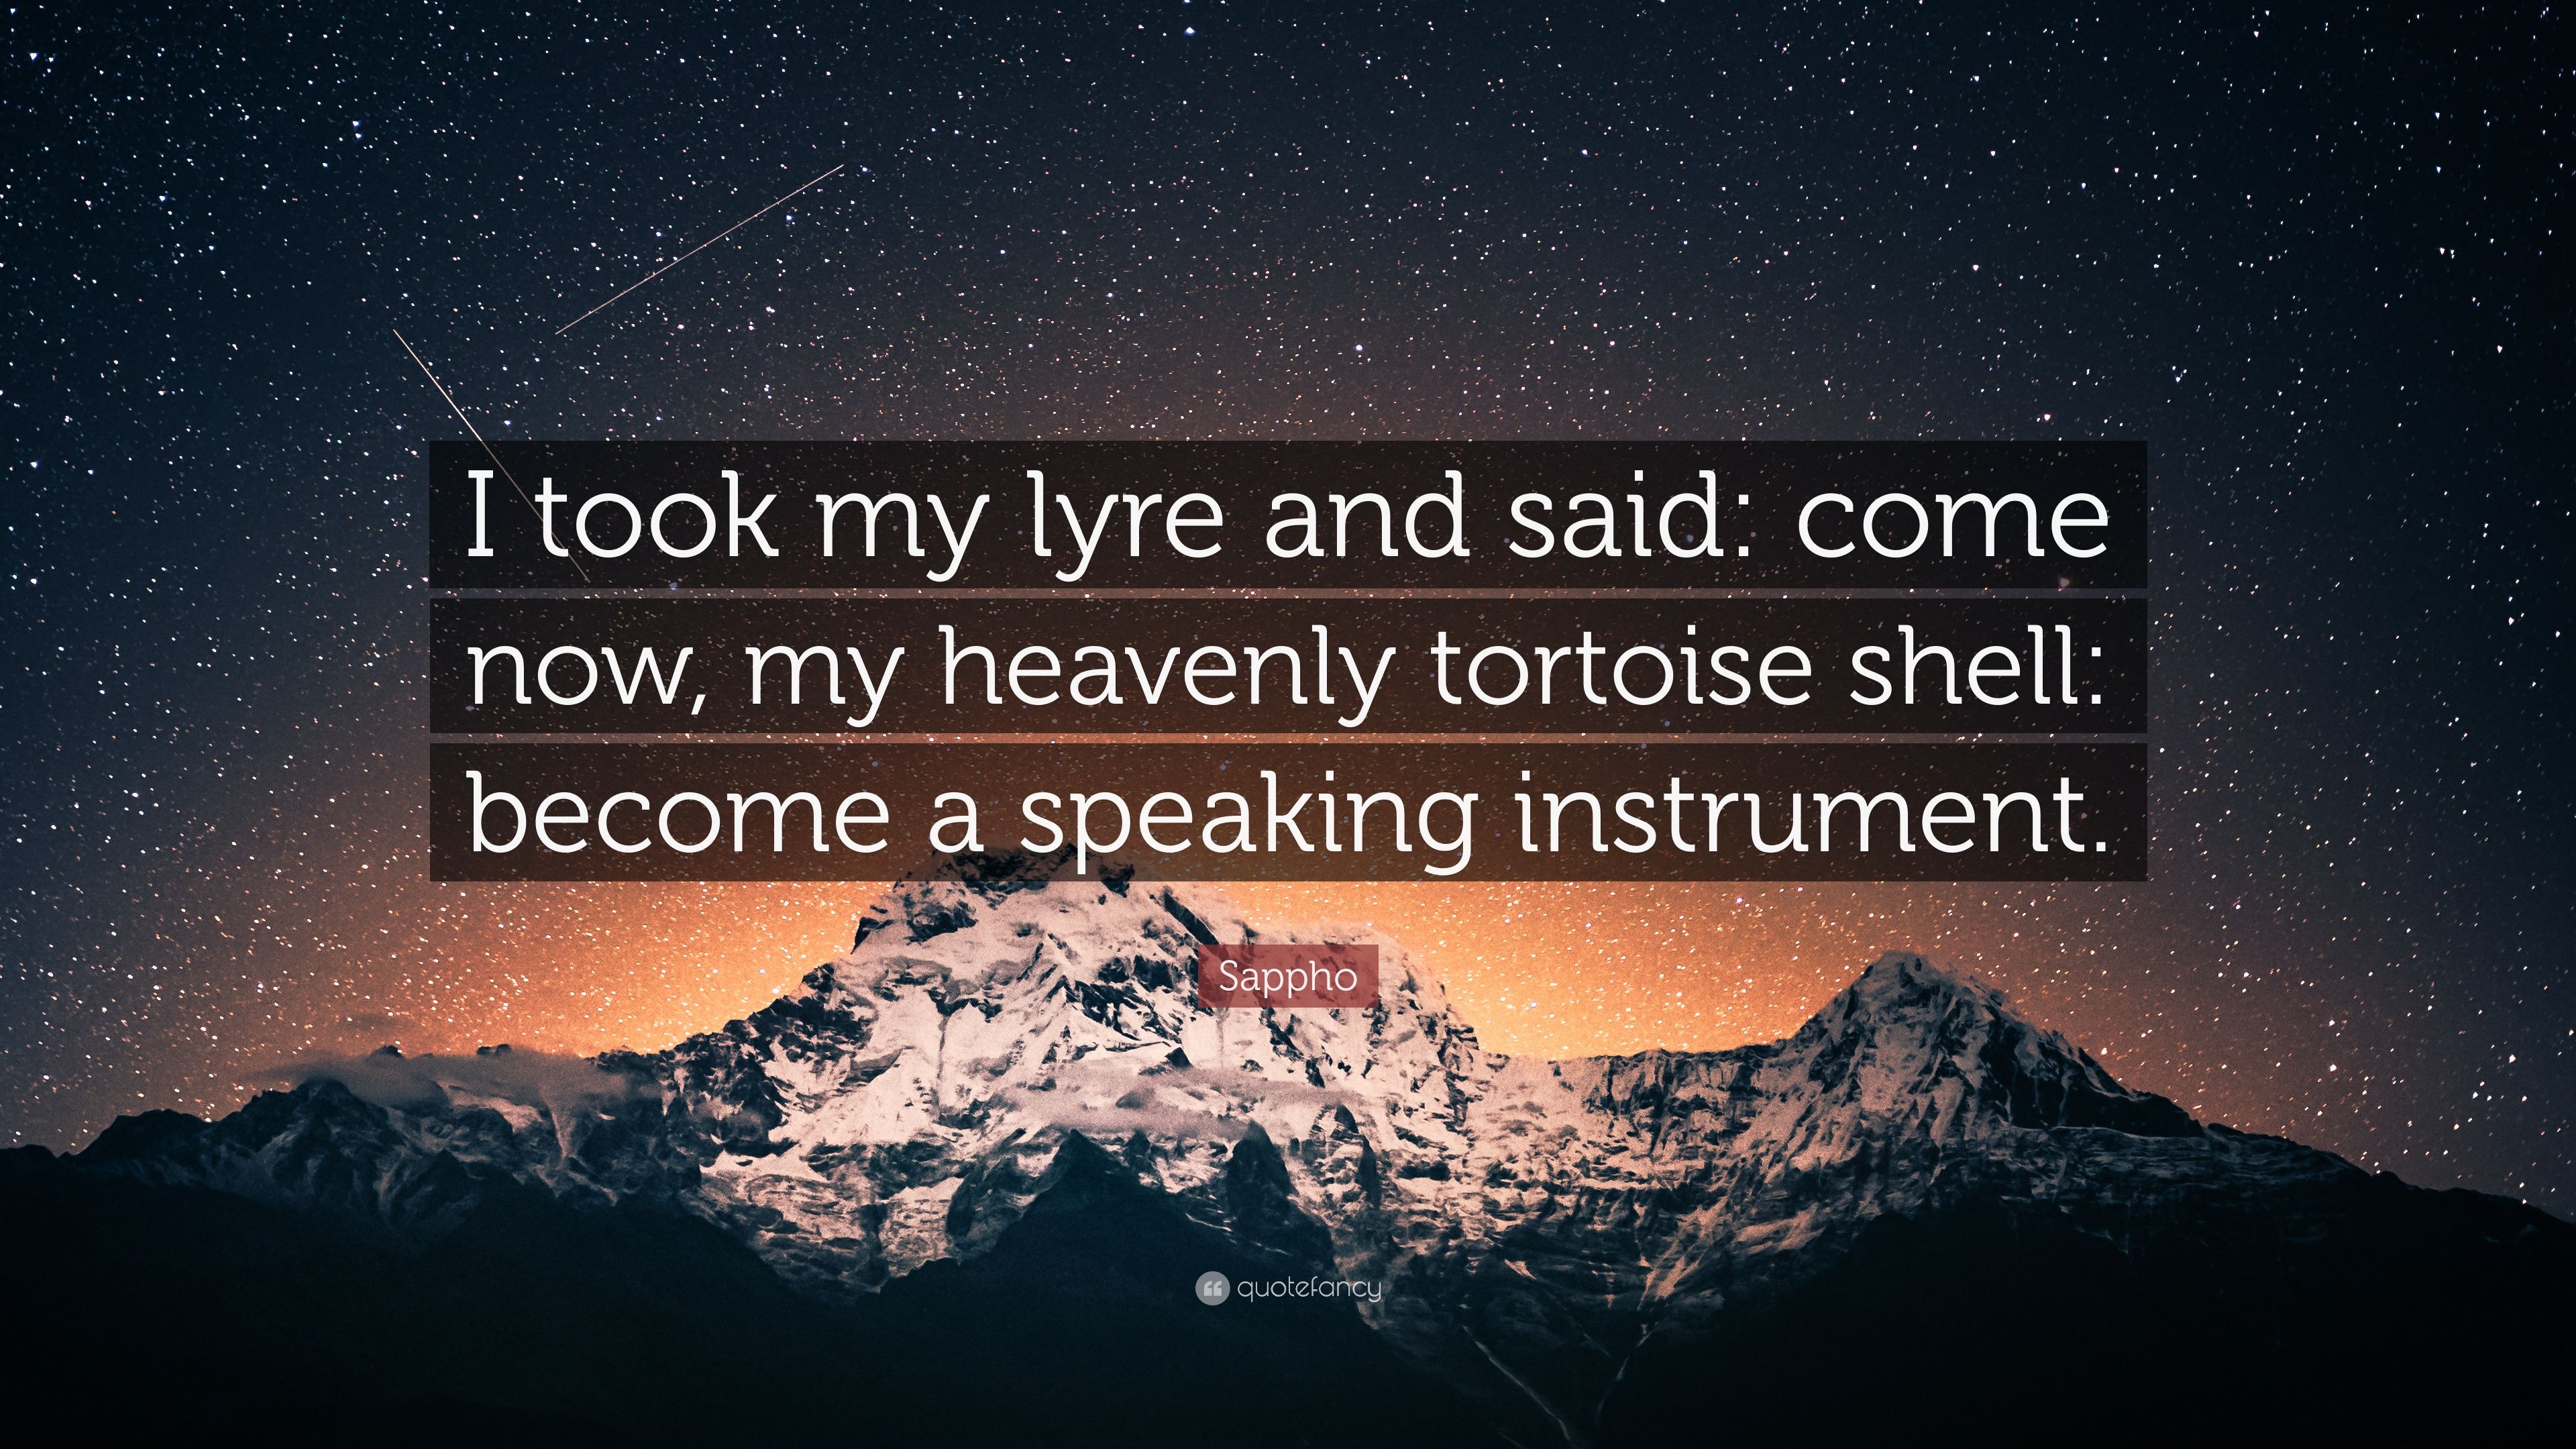 Sappho Quote: “I took my lyre and said: come now, my heavenly